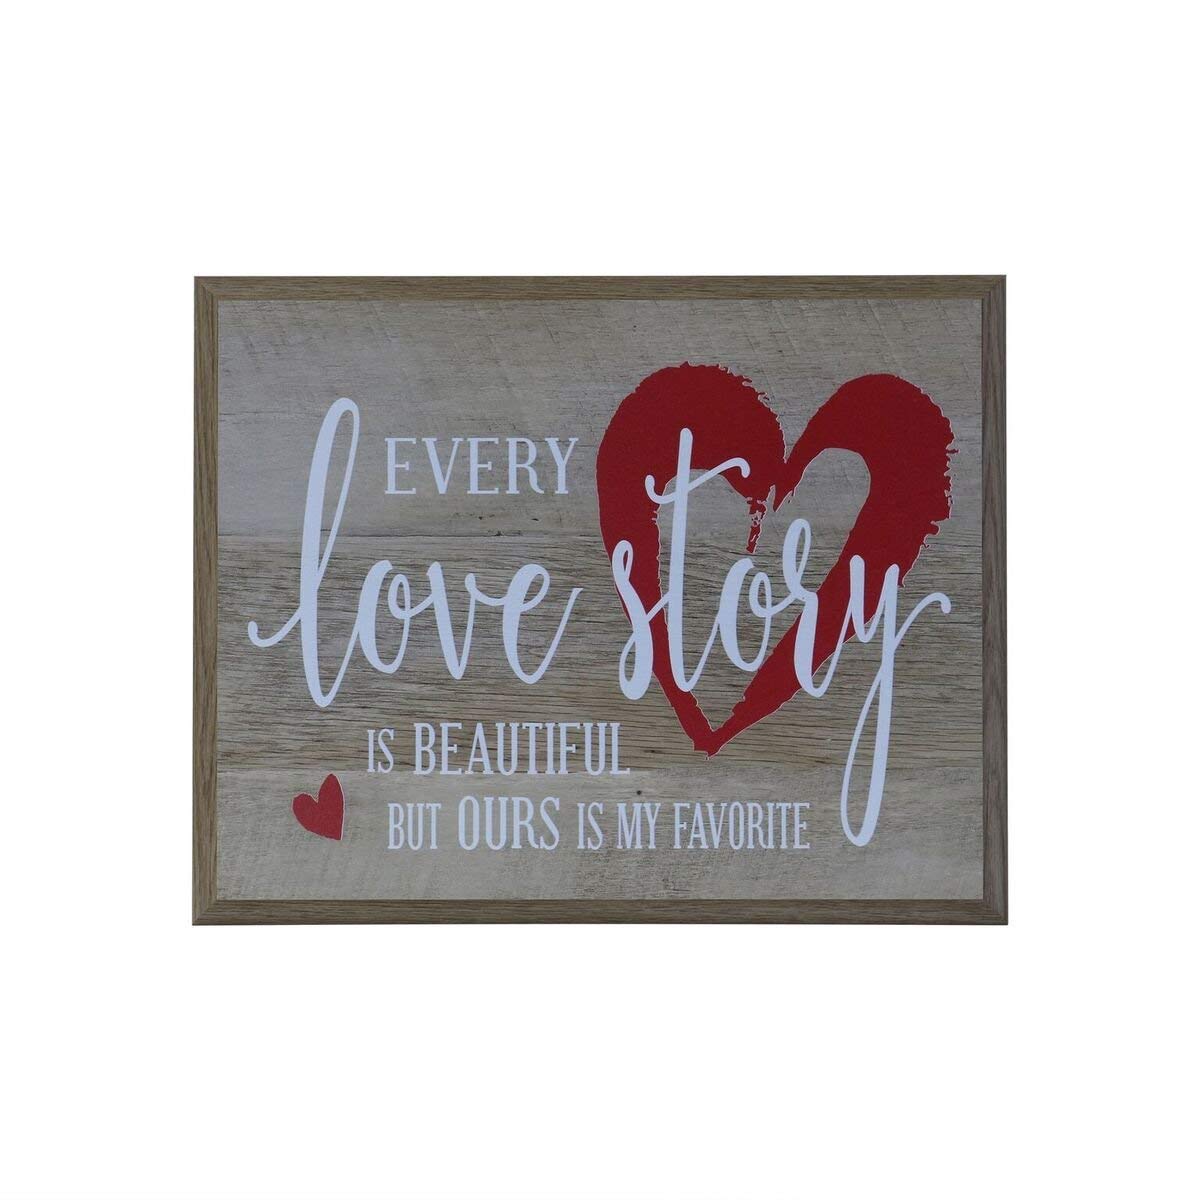 Digitally Printed Inspirational Wall Plaque - Every Love Story - LifeSong Milestones